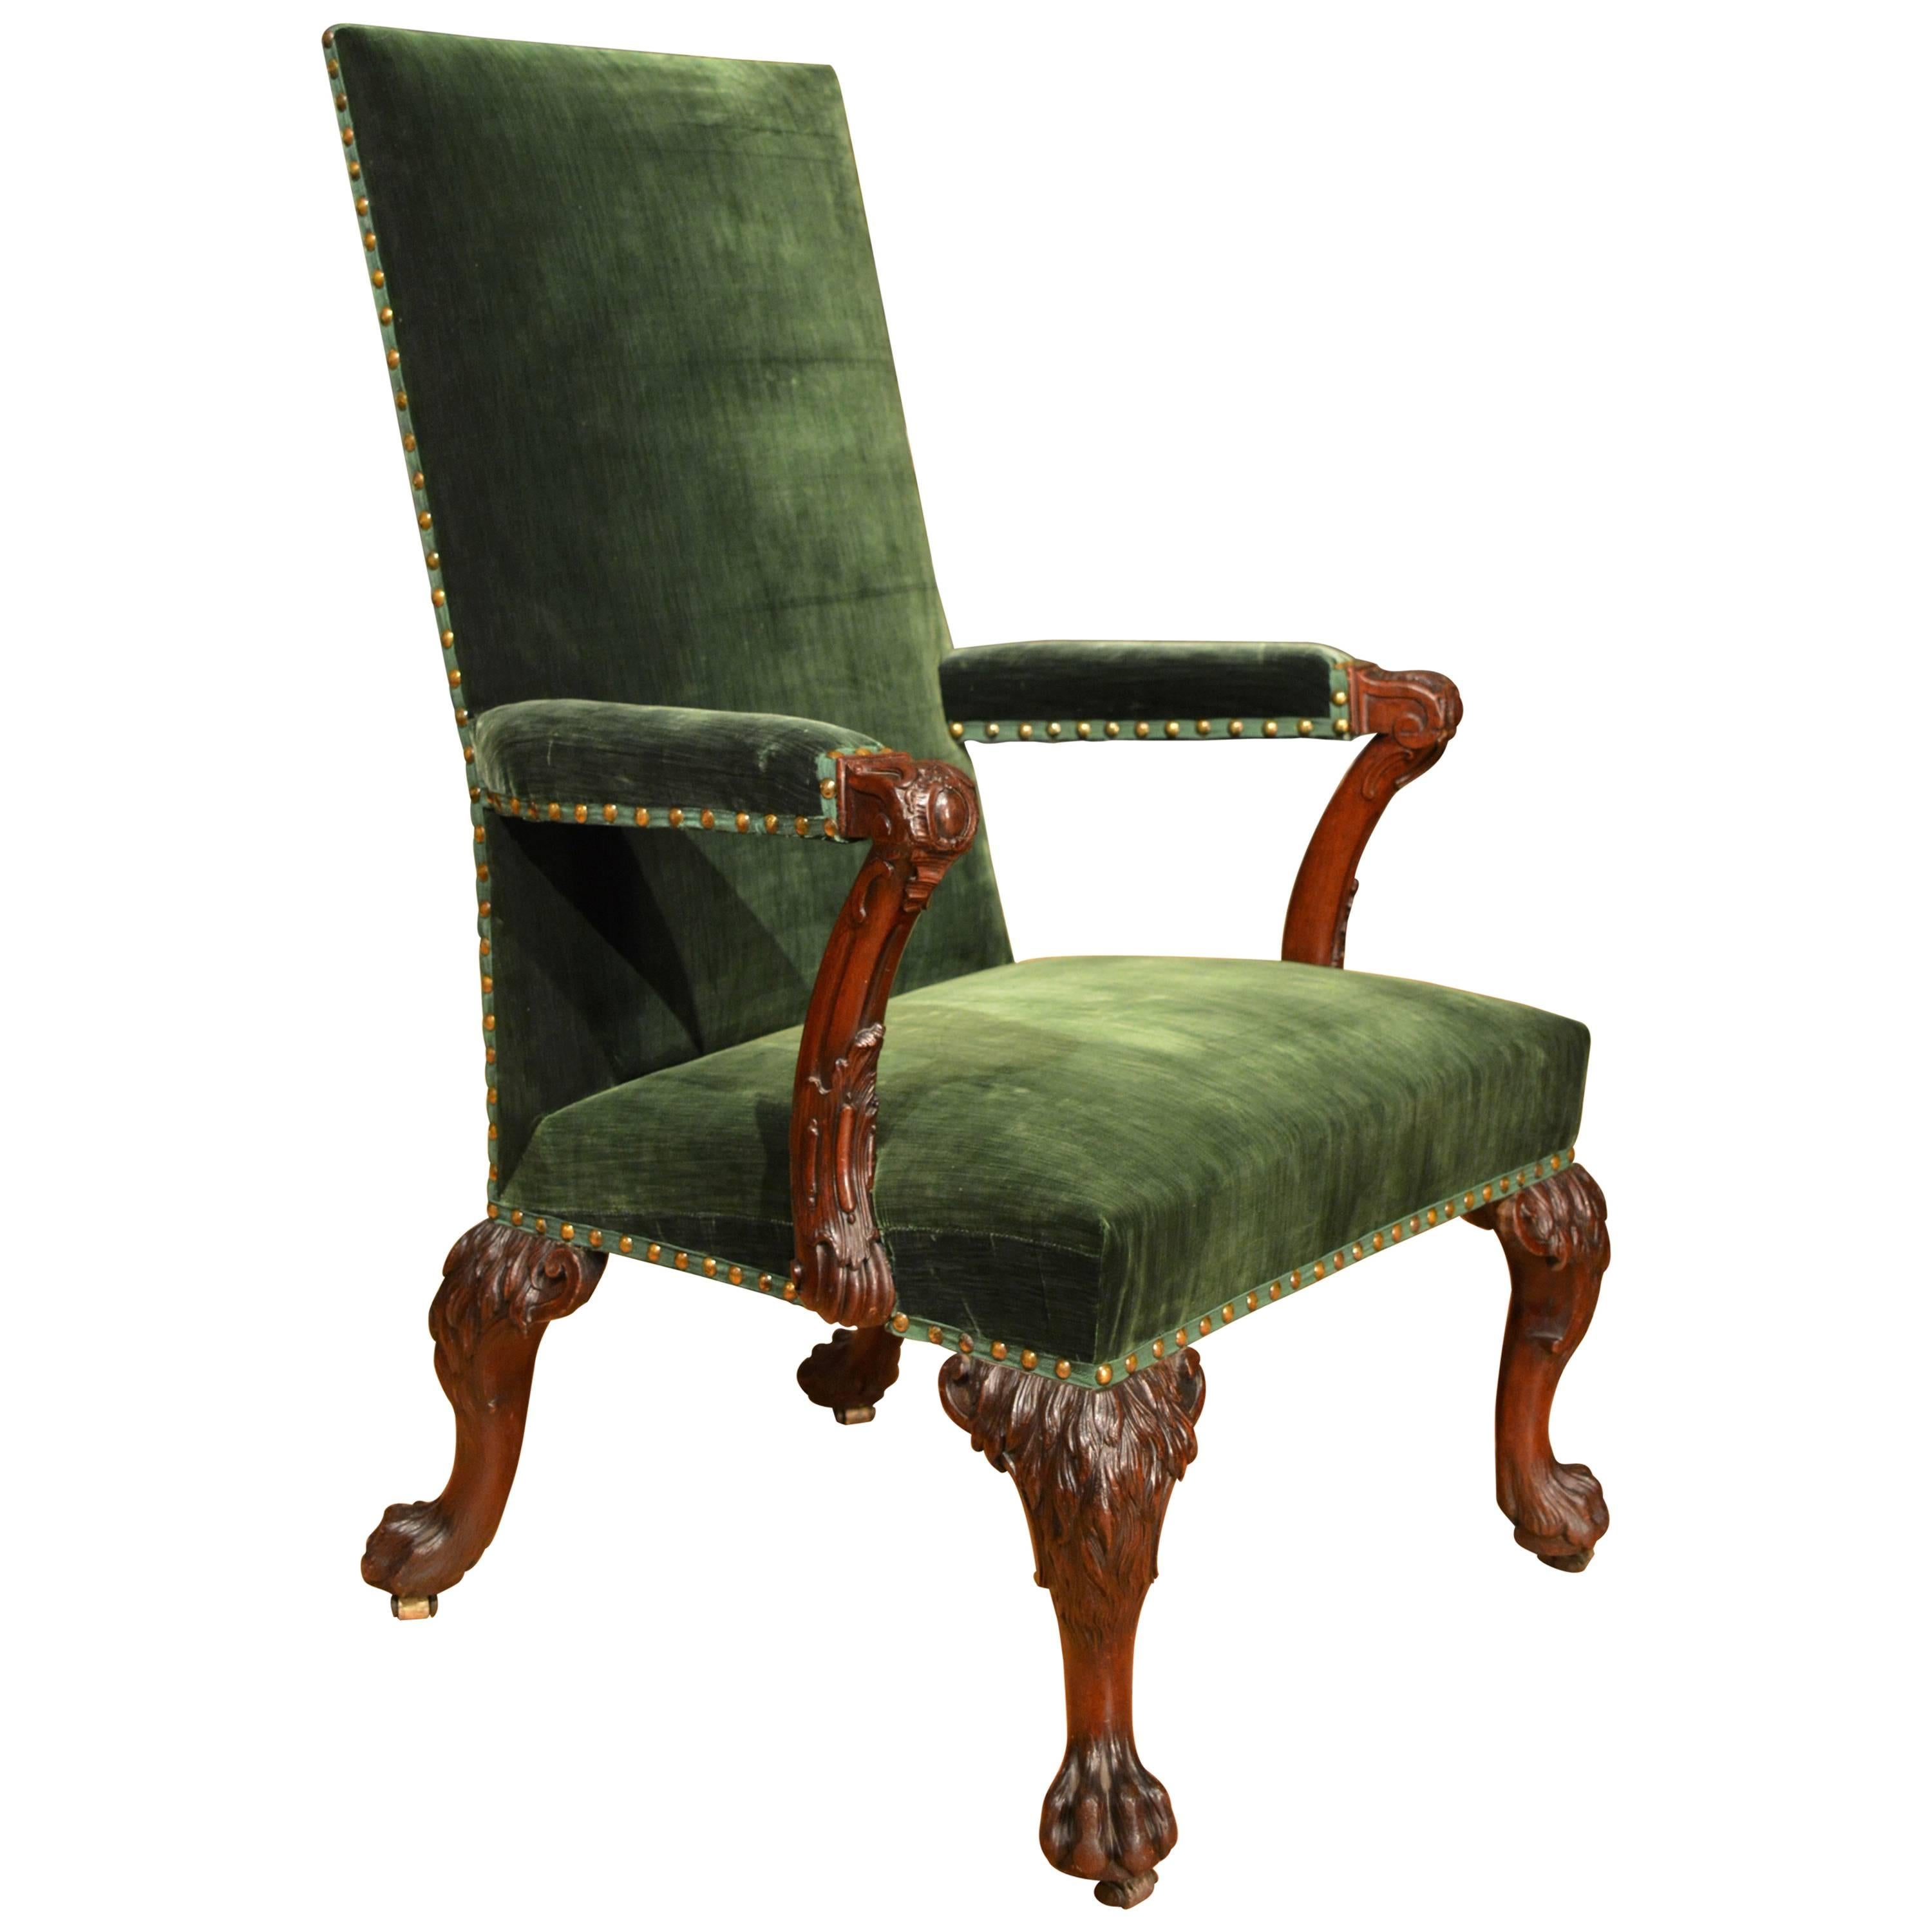 18th Century finely Carved Mahogany Armchair